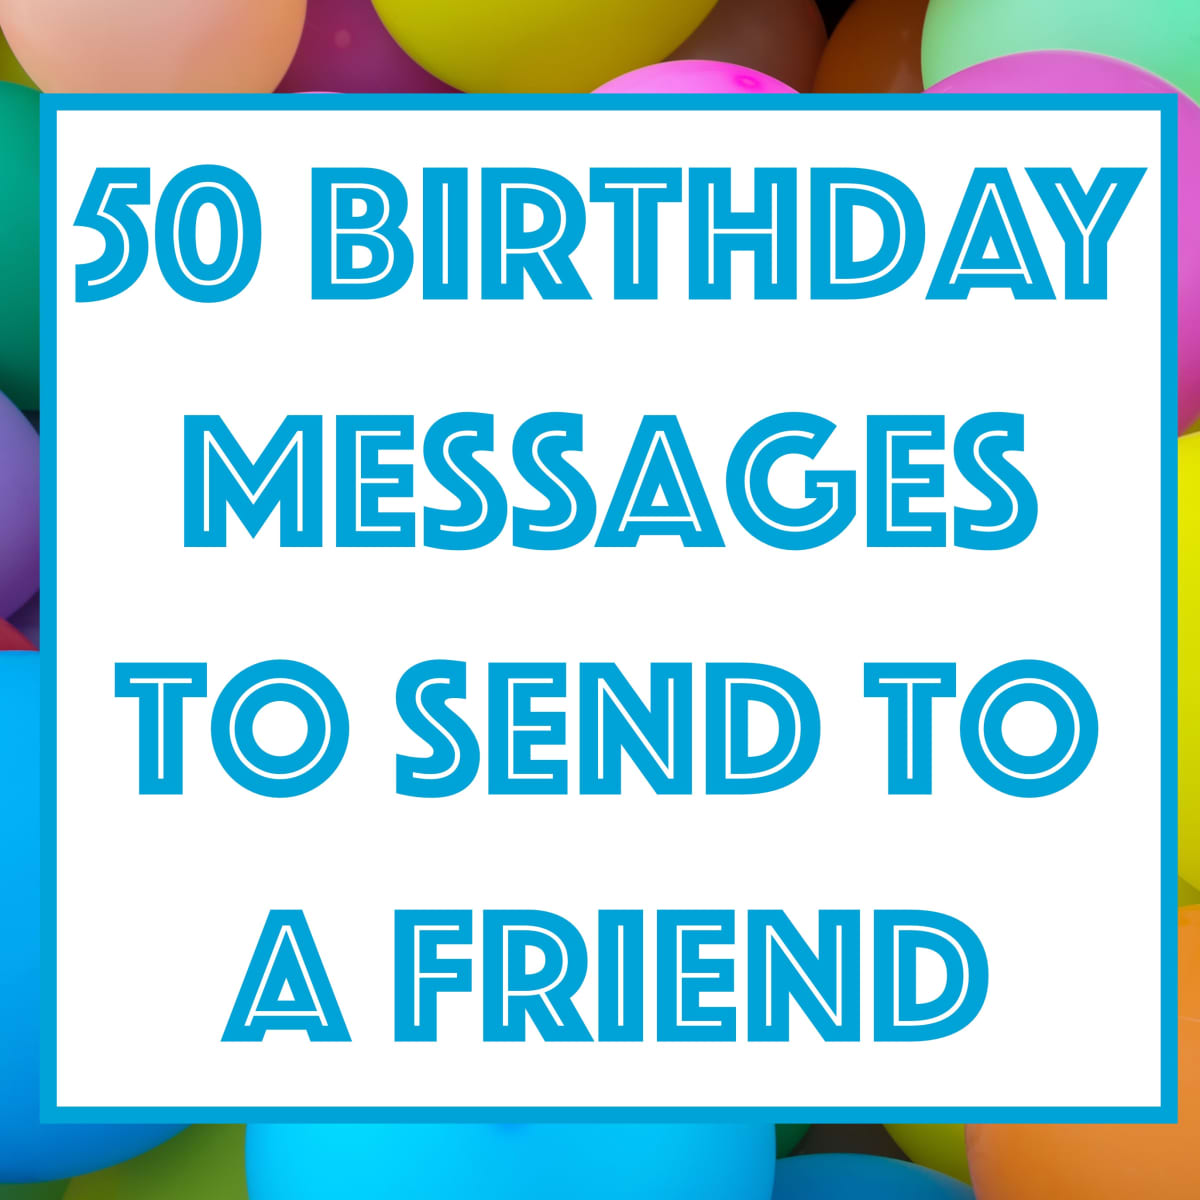 happy birthday messages for friend